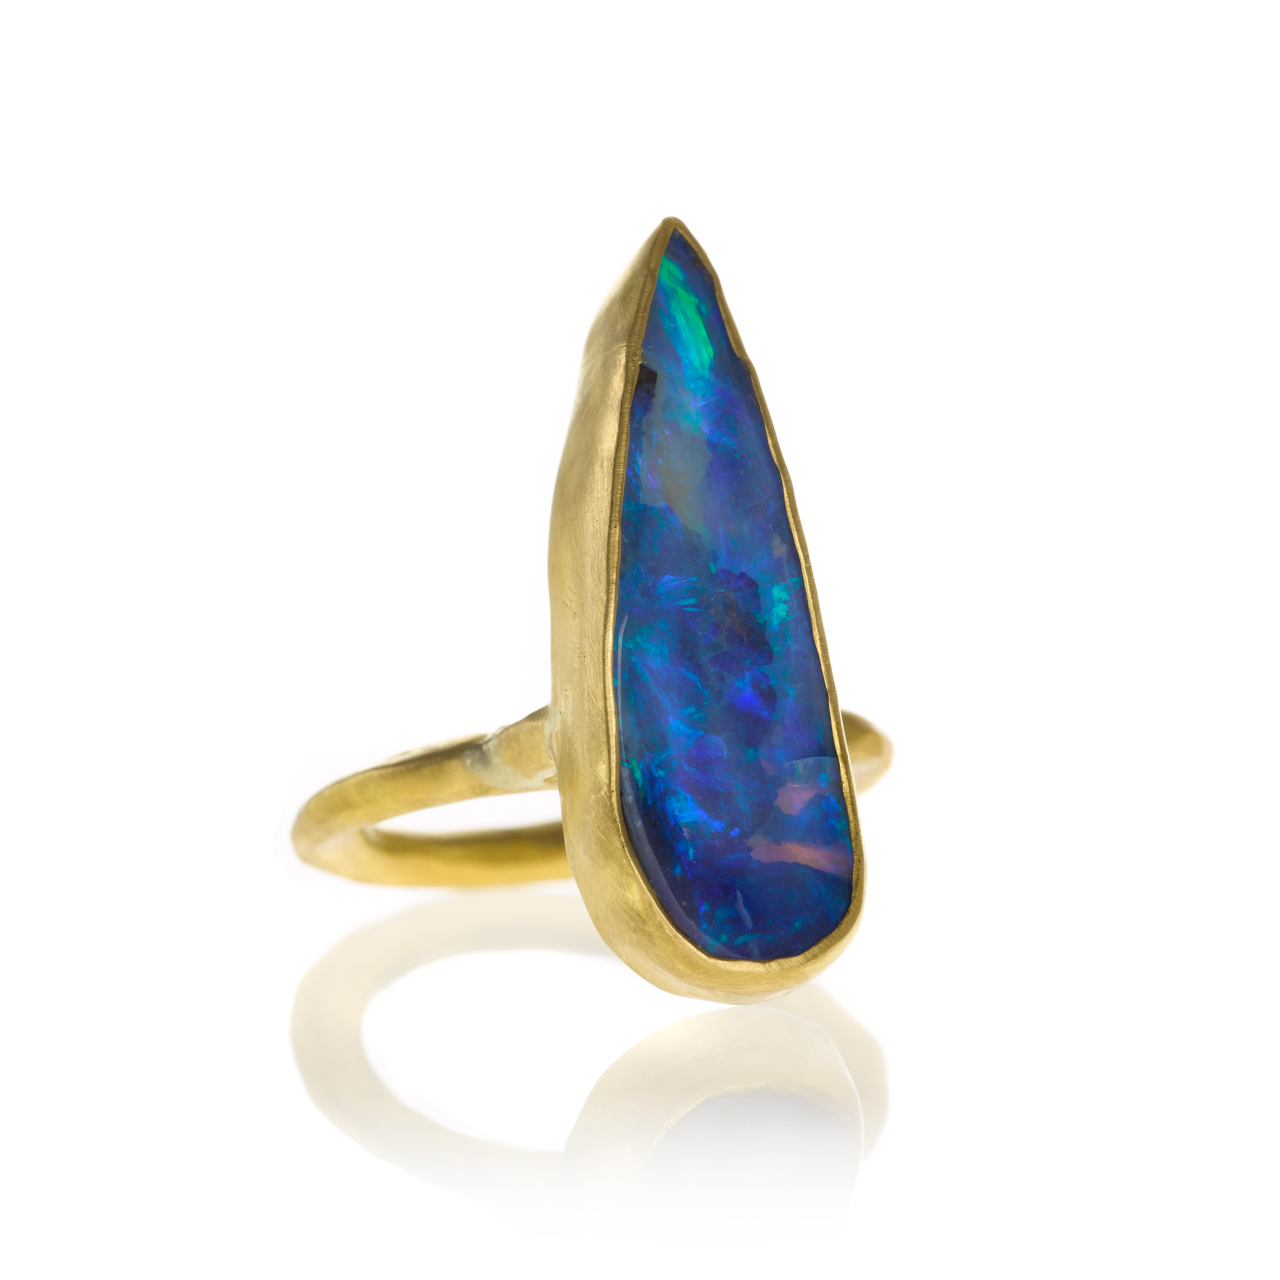  Ring in 22k gold with boulder opal, $3,740. 